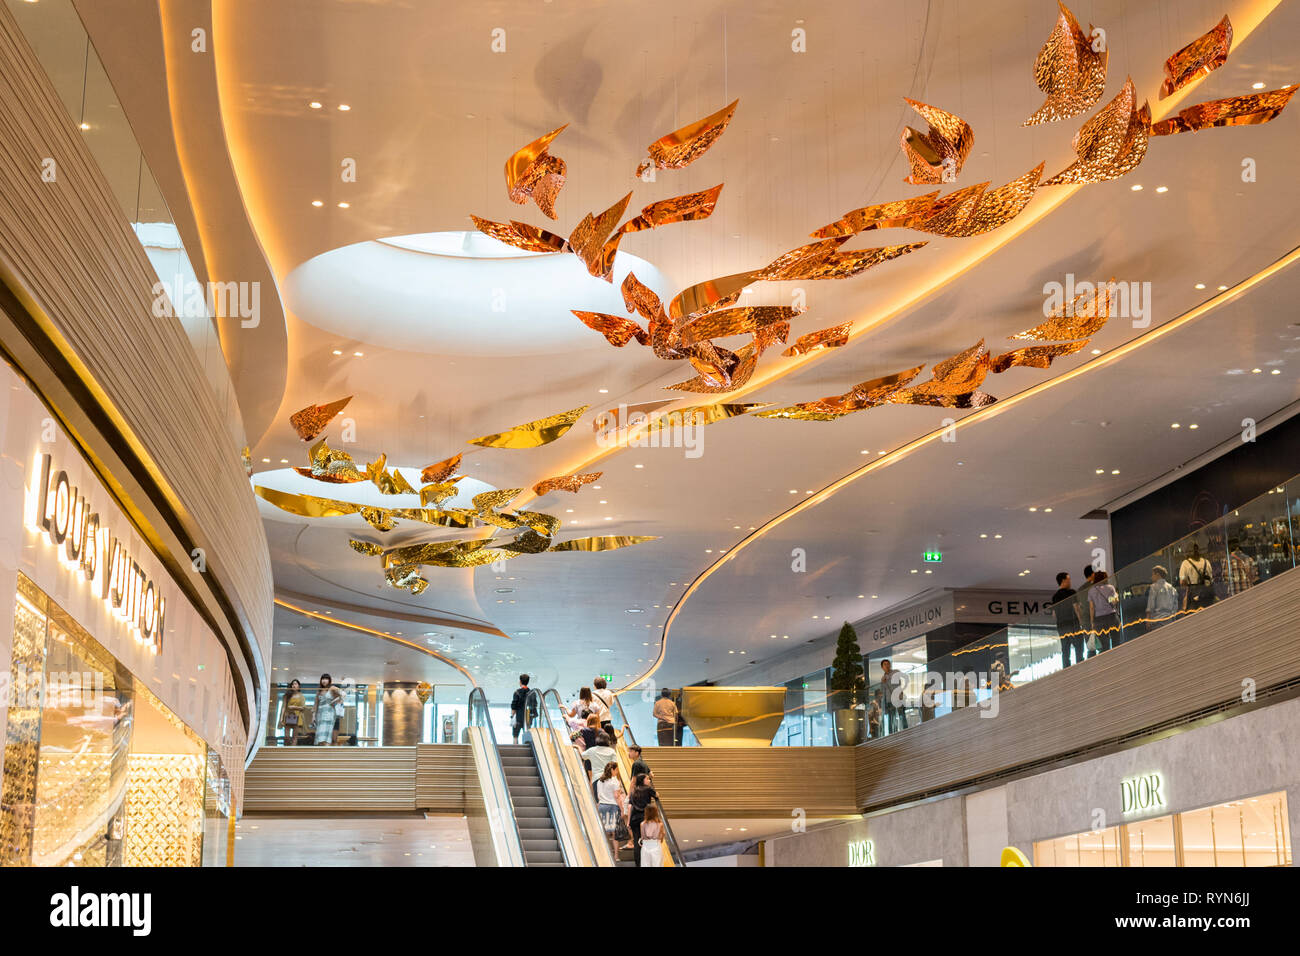 Bangkok, Thailand - December 15, 2018: an interior of Iconsiam Shopping Mall, a ceiling decoration above Louis Vuitton, Gems Pavilion and Dior stores. Stock Photo